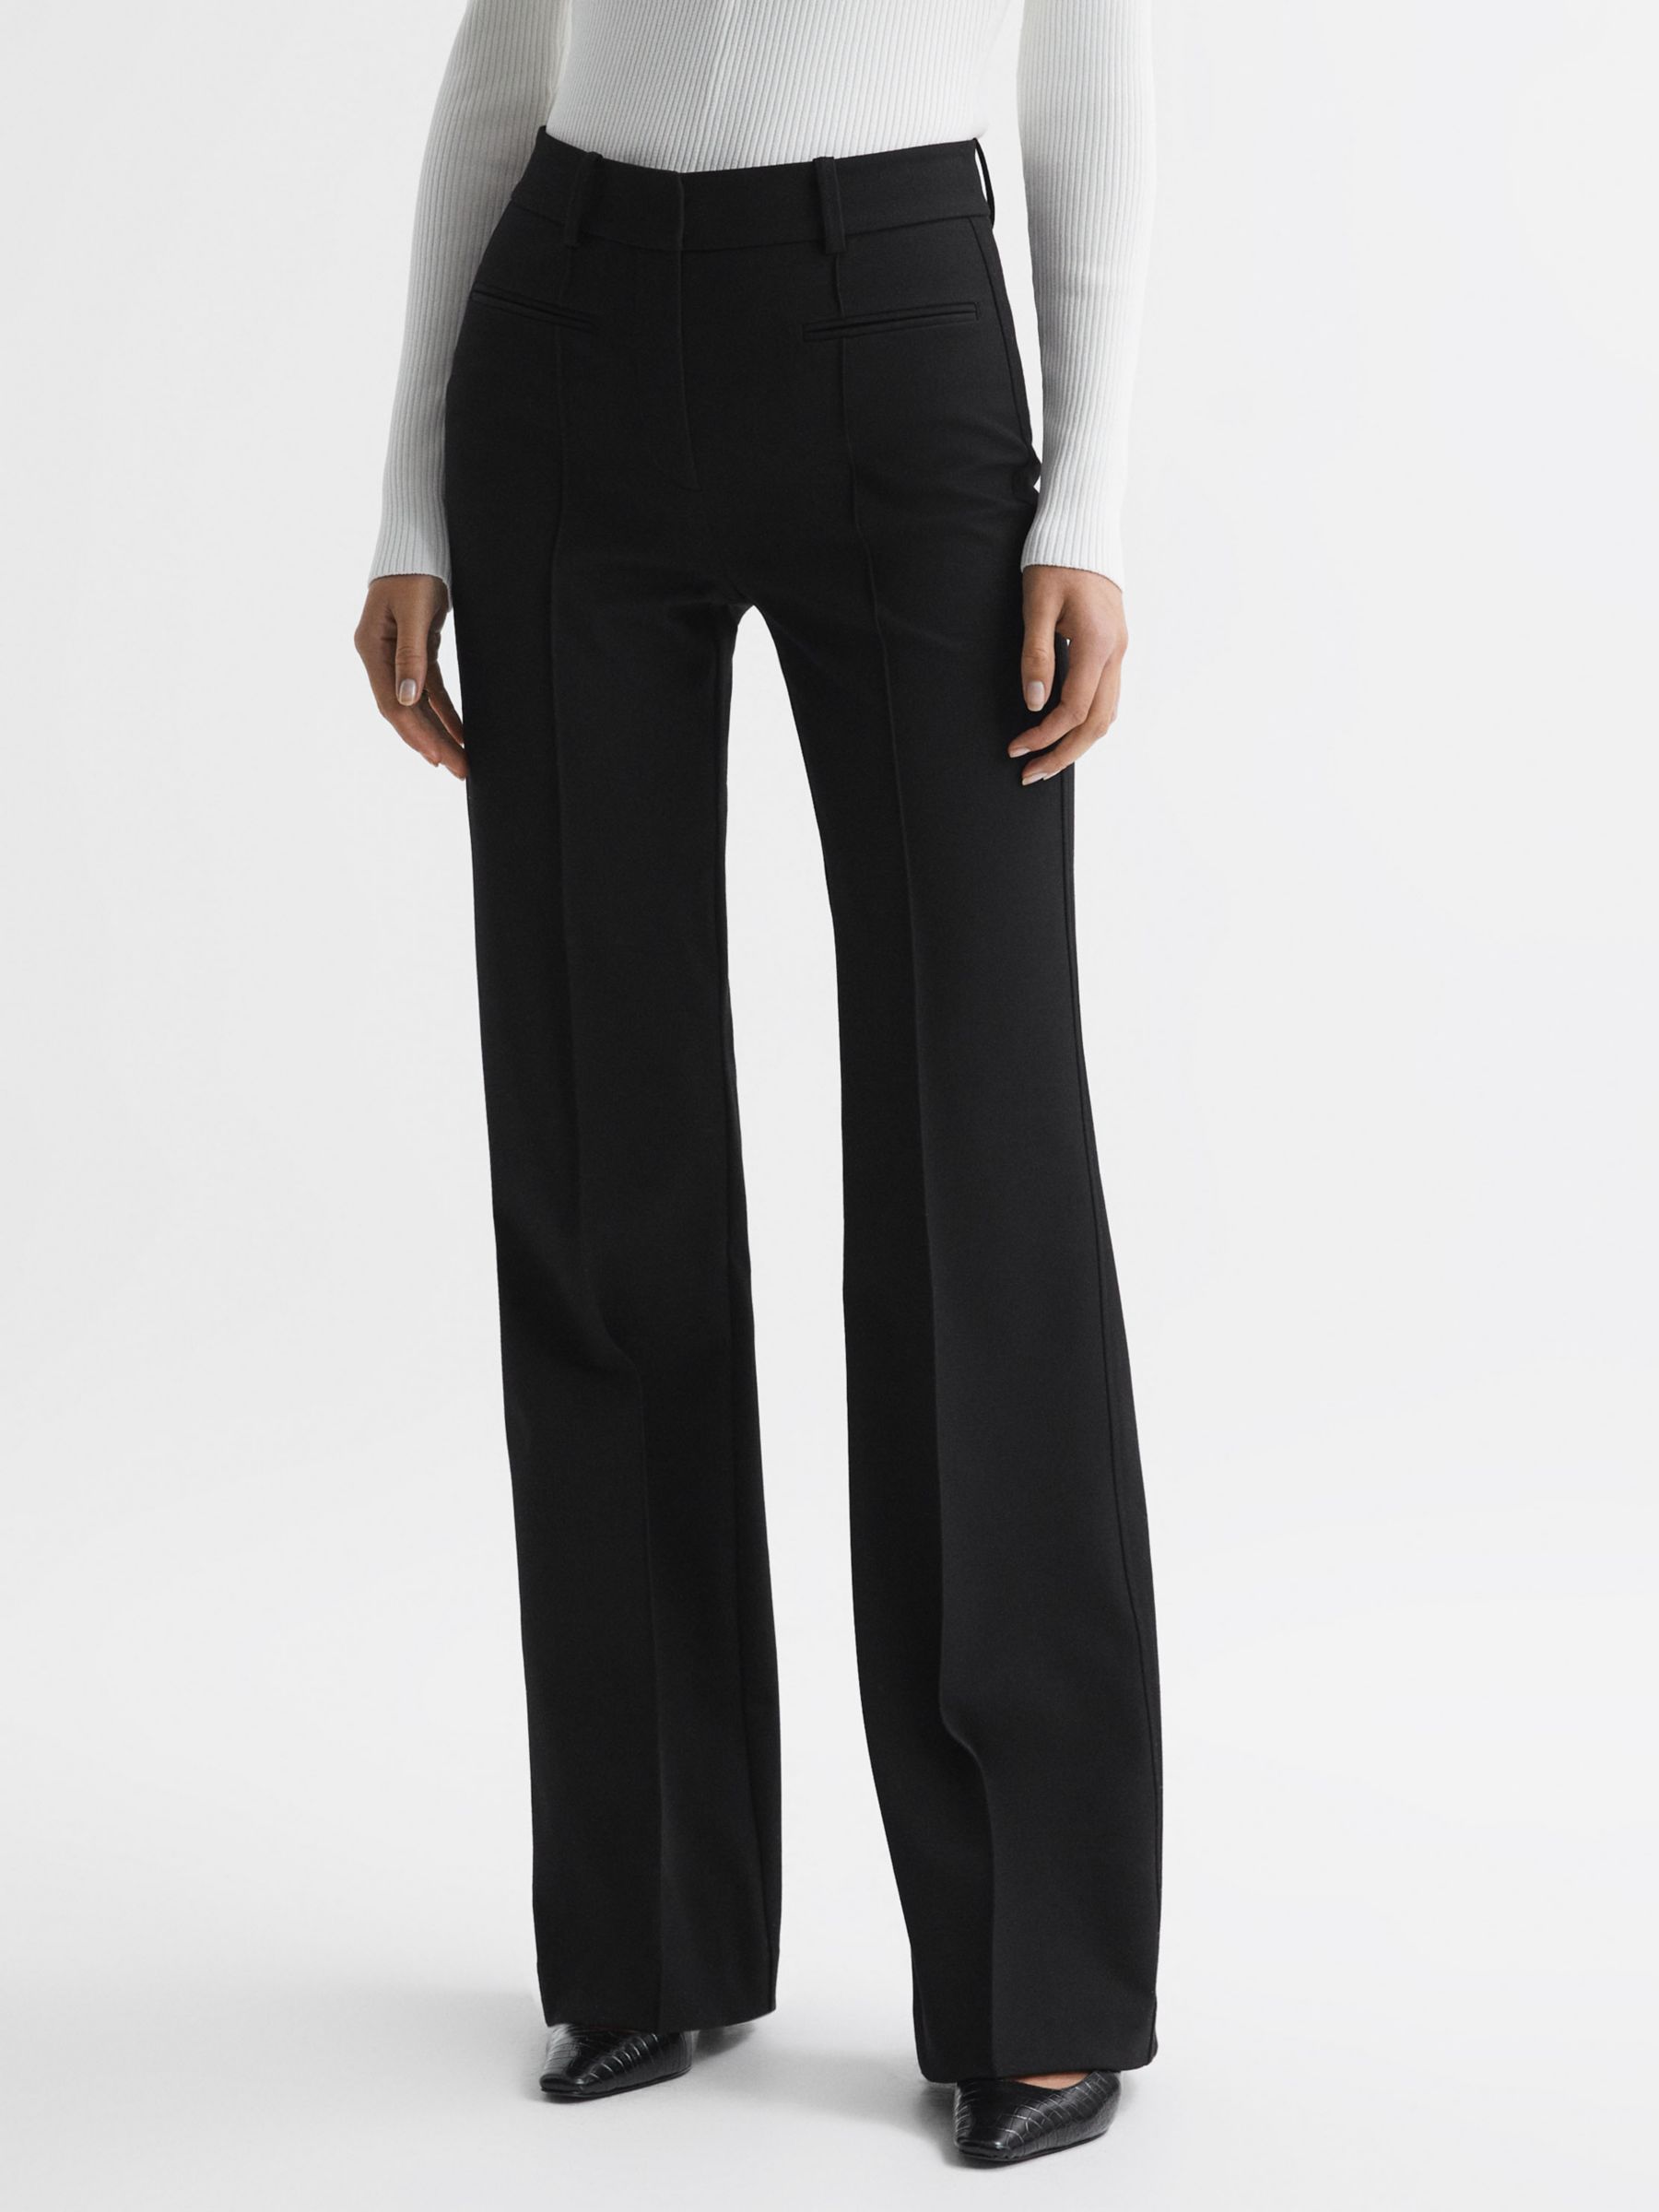 Reiss Claude Flared Tailored Trousers, Black at John Lewis & Partners